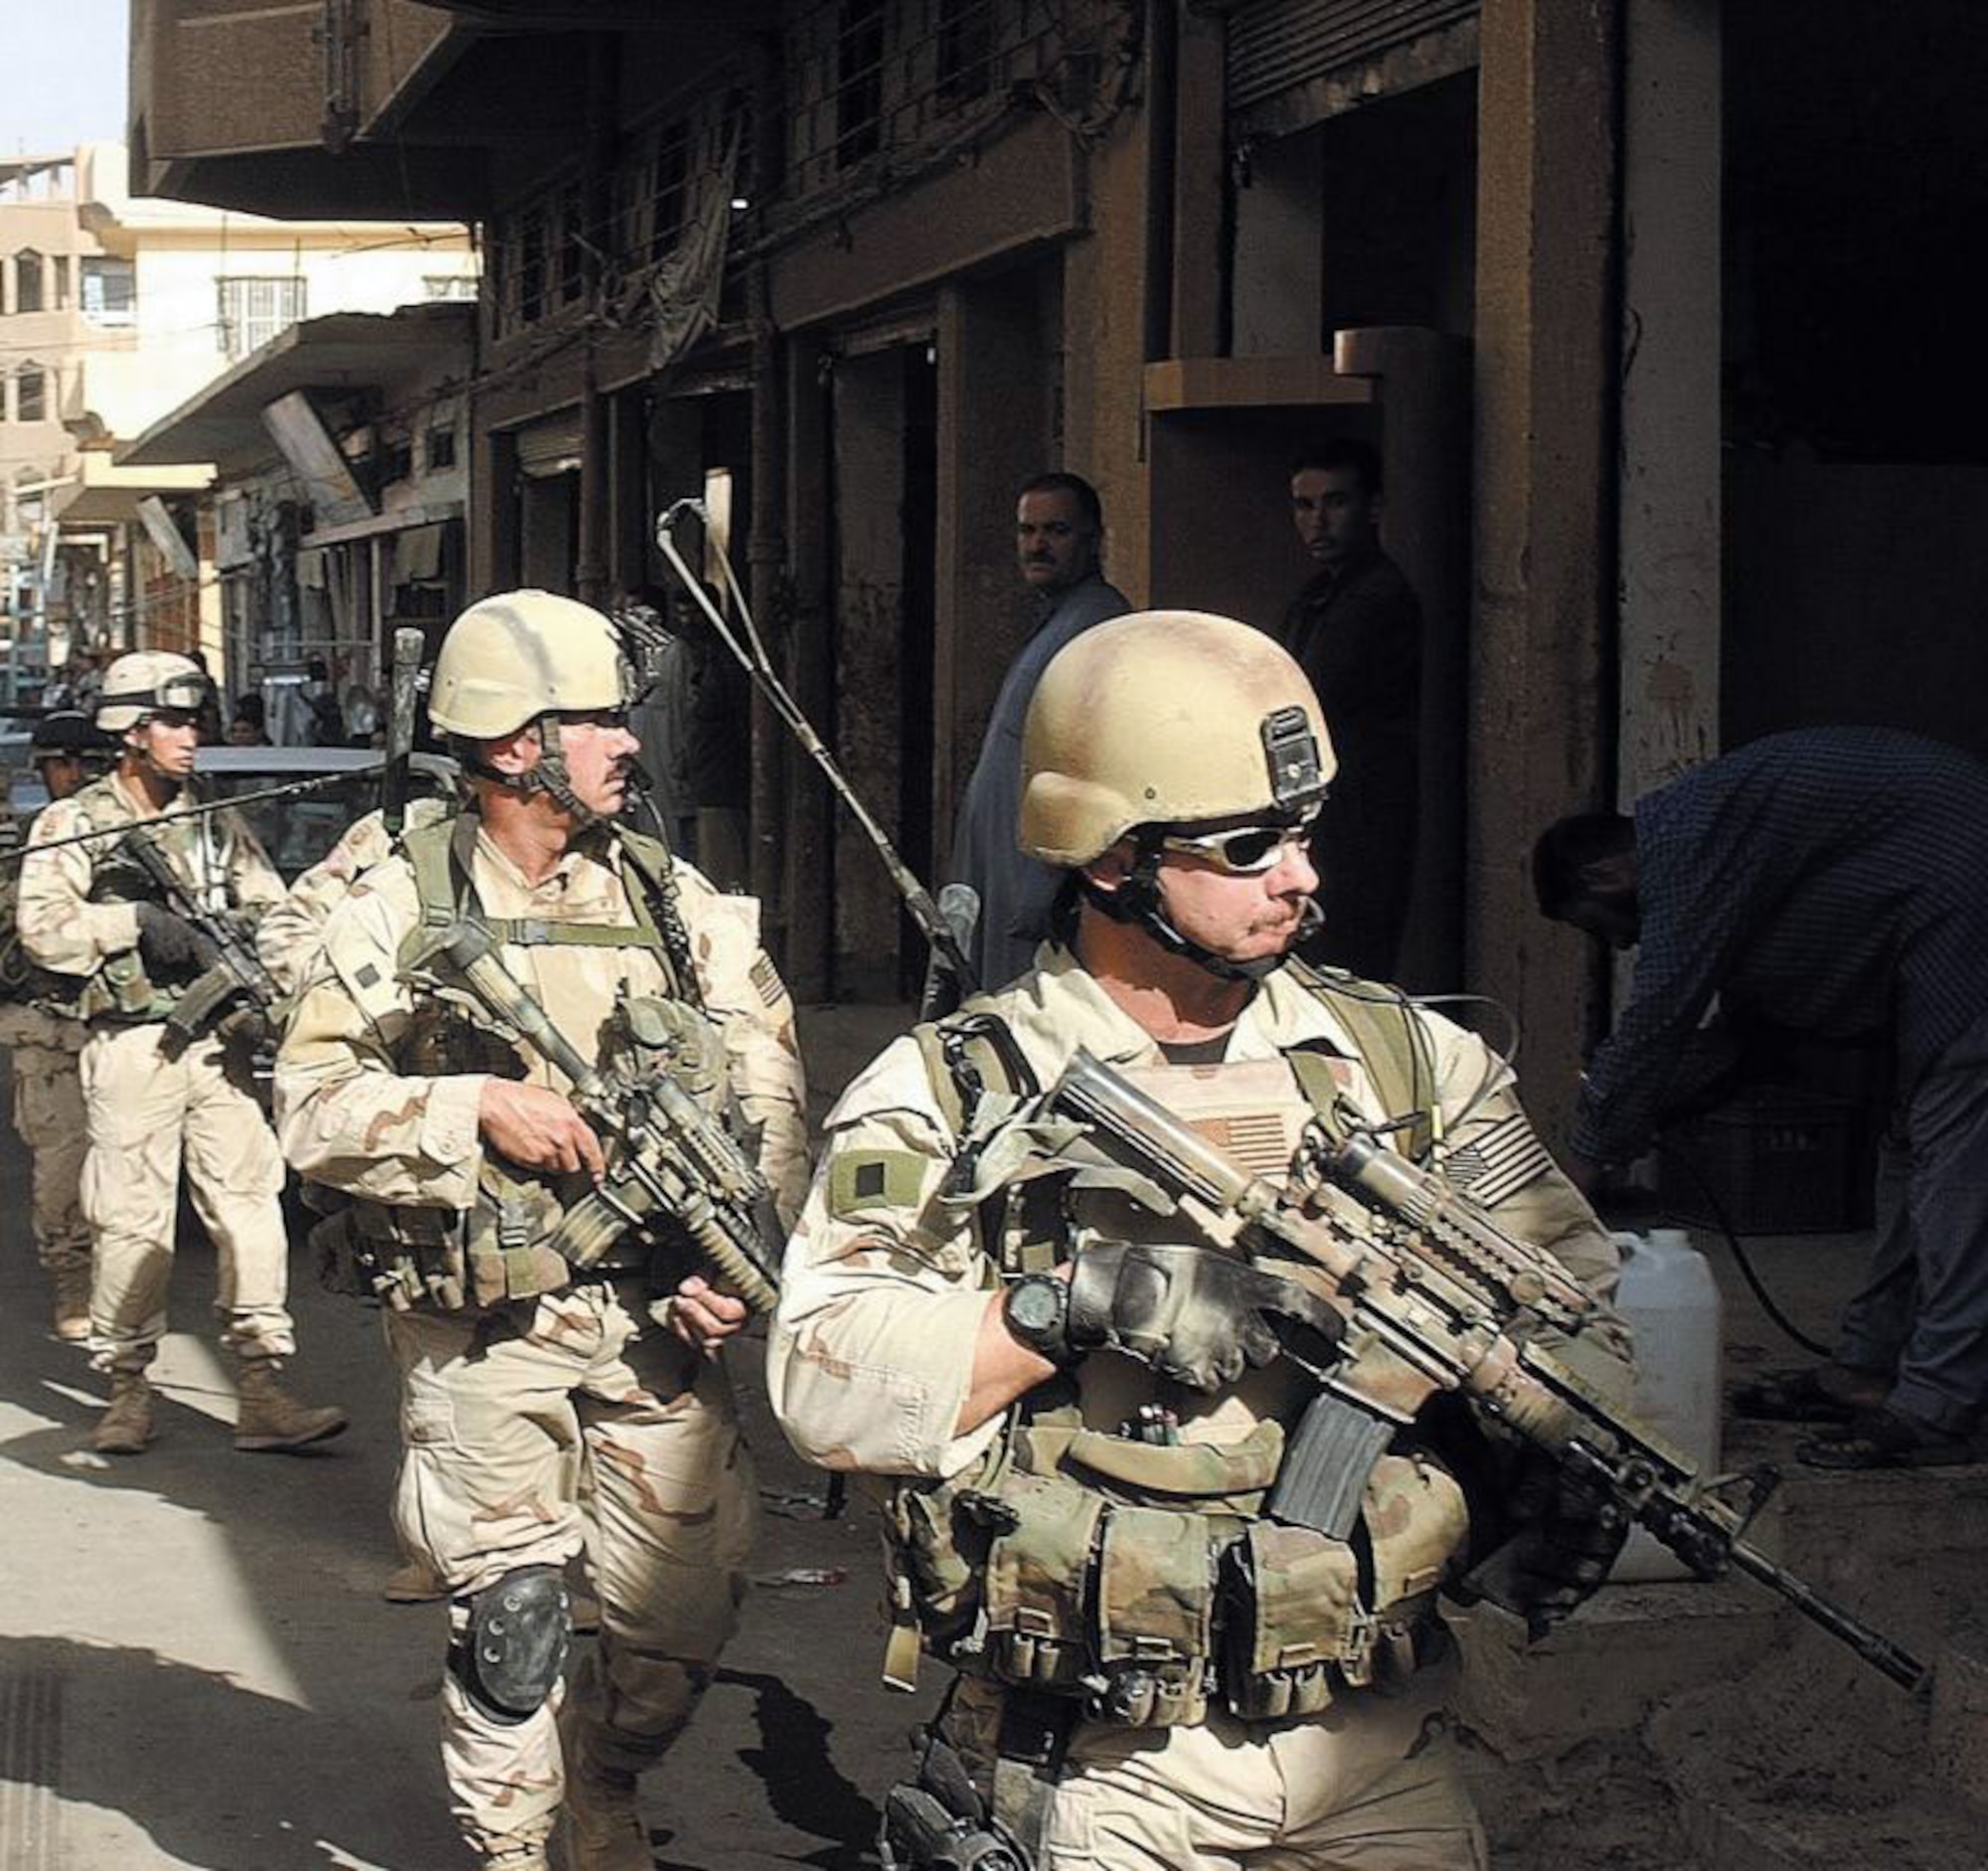 Two members of an Air Force Tactical Air Control Party accompany Army 82nd Airborne Division soldiers on a foot patrol through an arms market in Iraq. (U.S. Air Force photo)